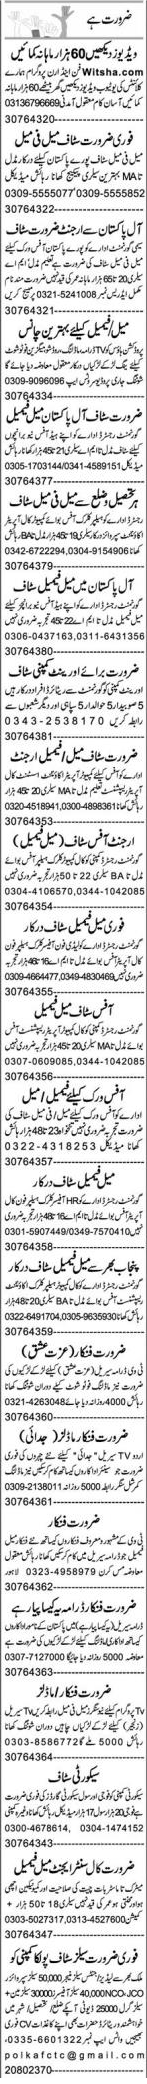 Daily Express Newspaper Classified Jobs 2021 in Lahore